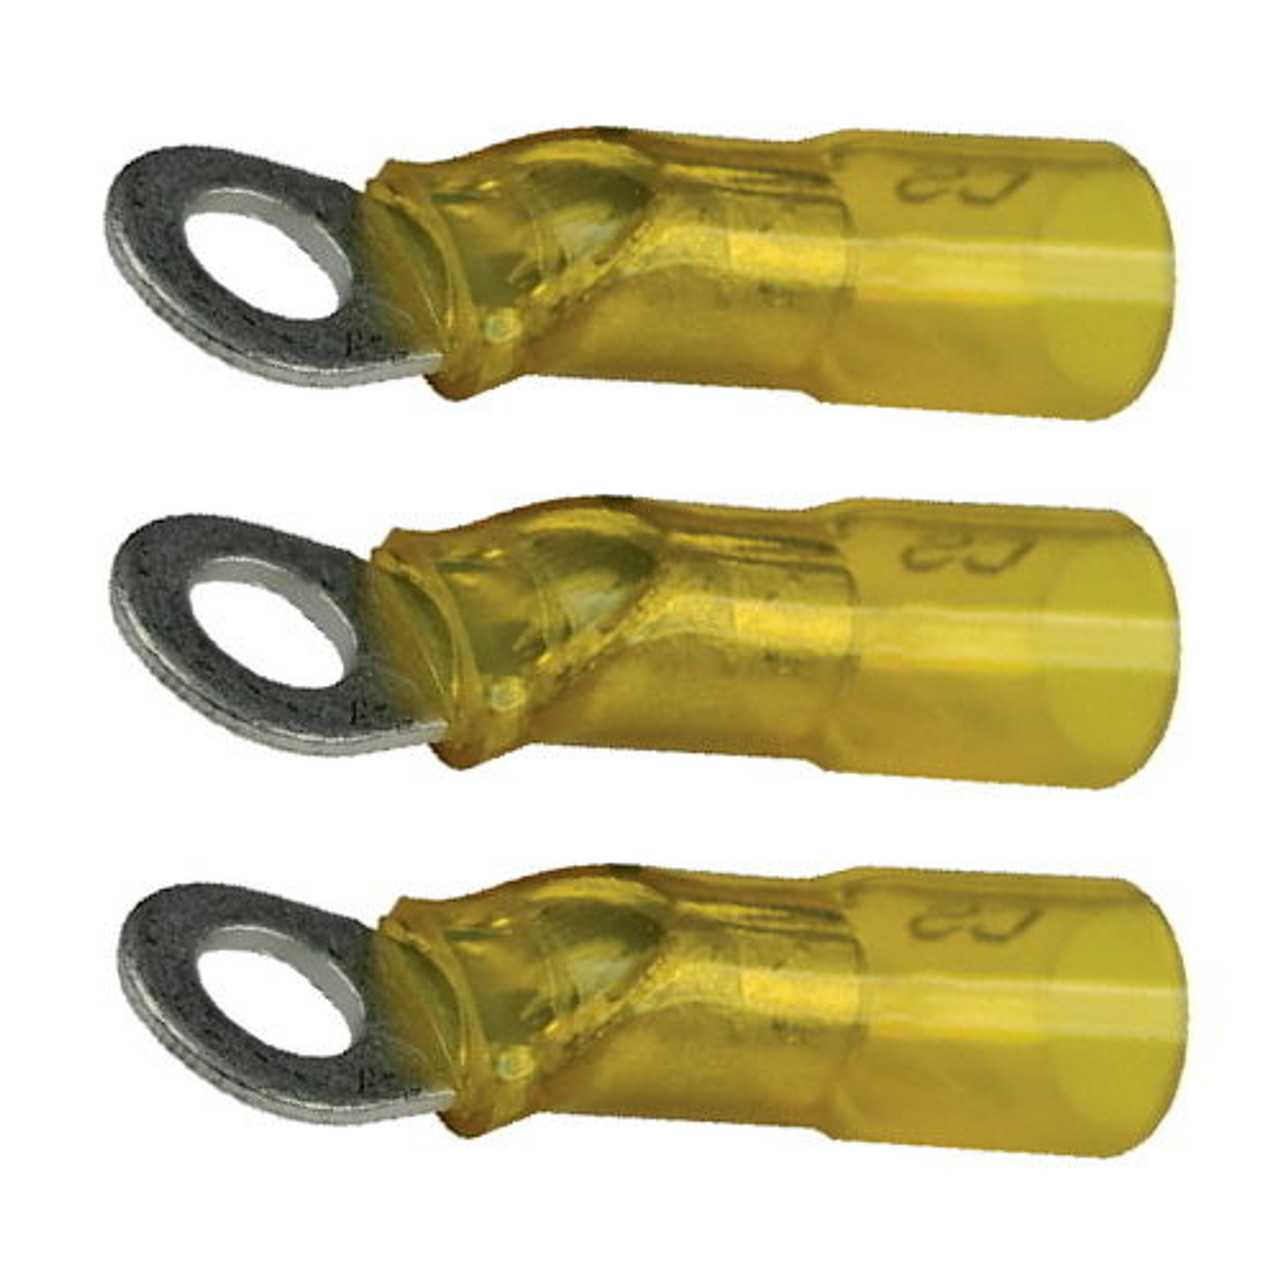 3 Pack Yellow 12-10 AWG Heat Shrink #10 Ring Terminals for Boats